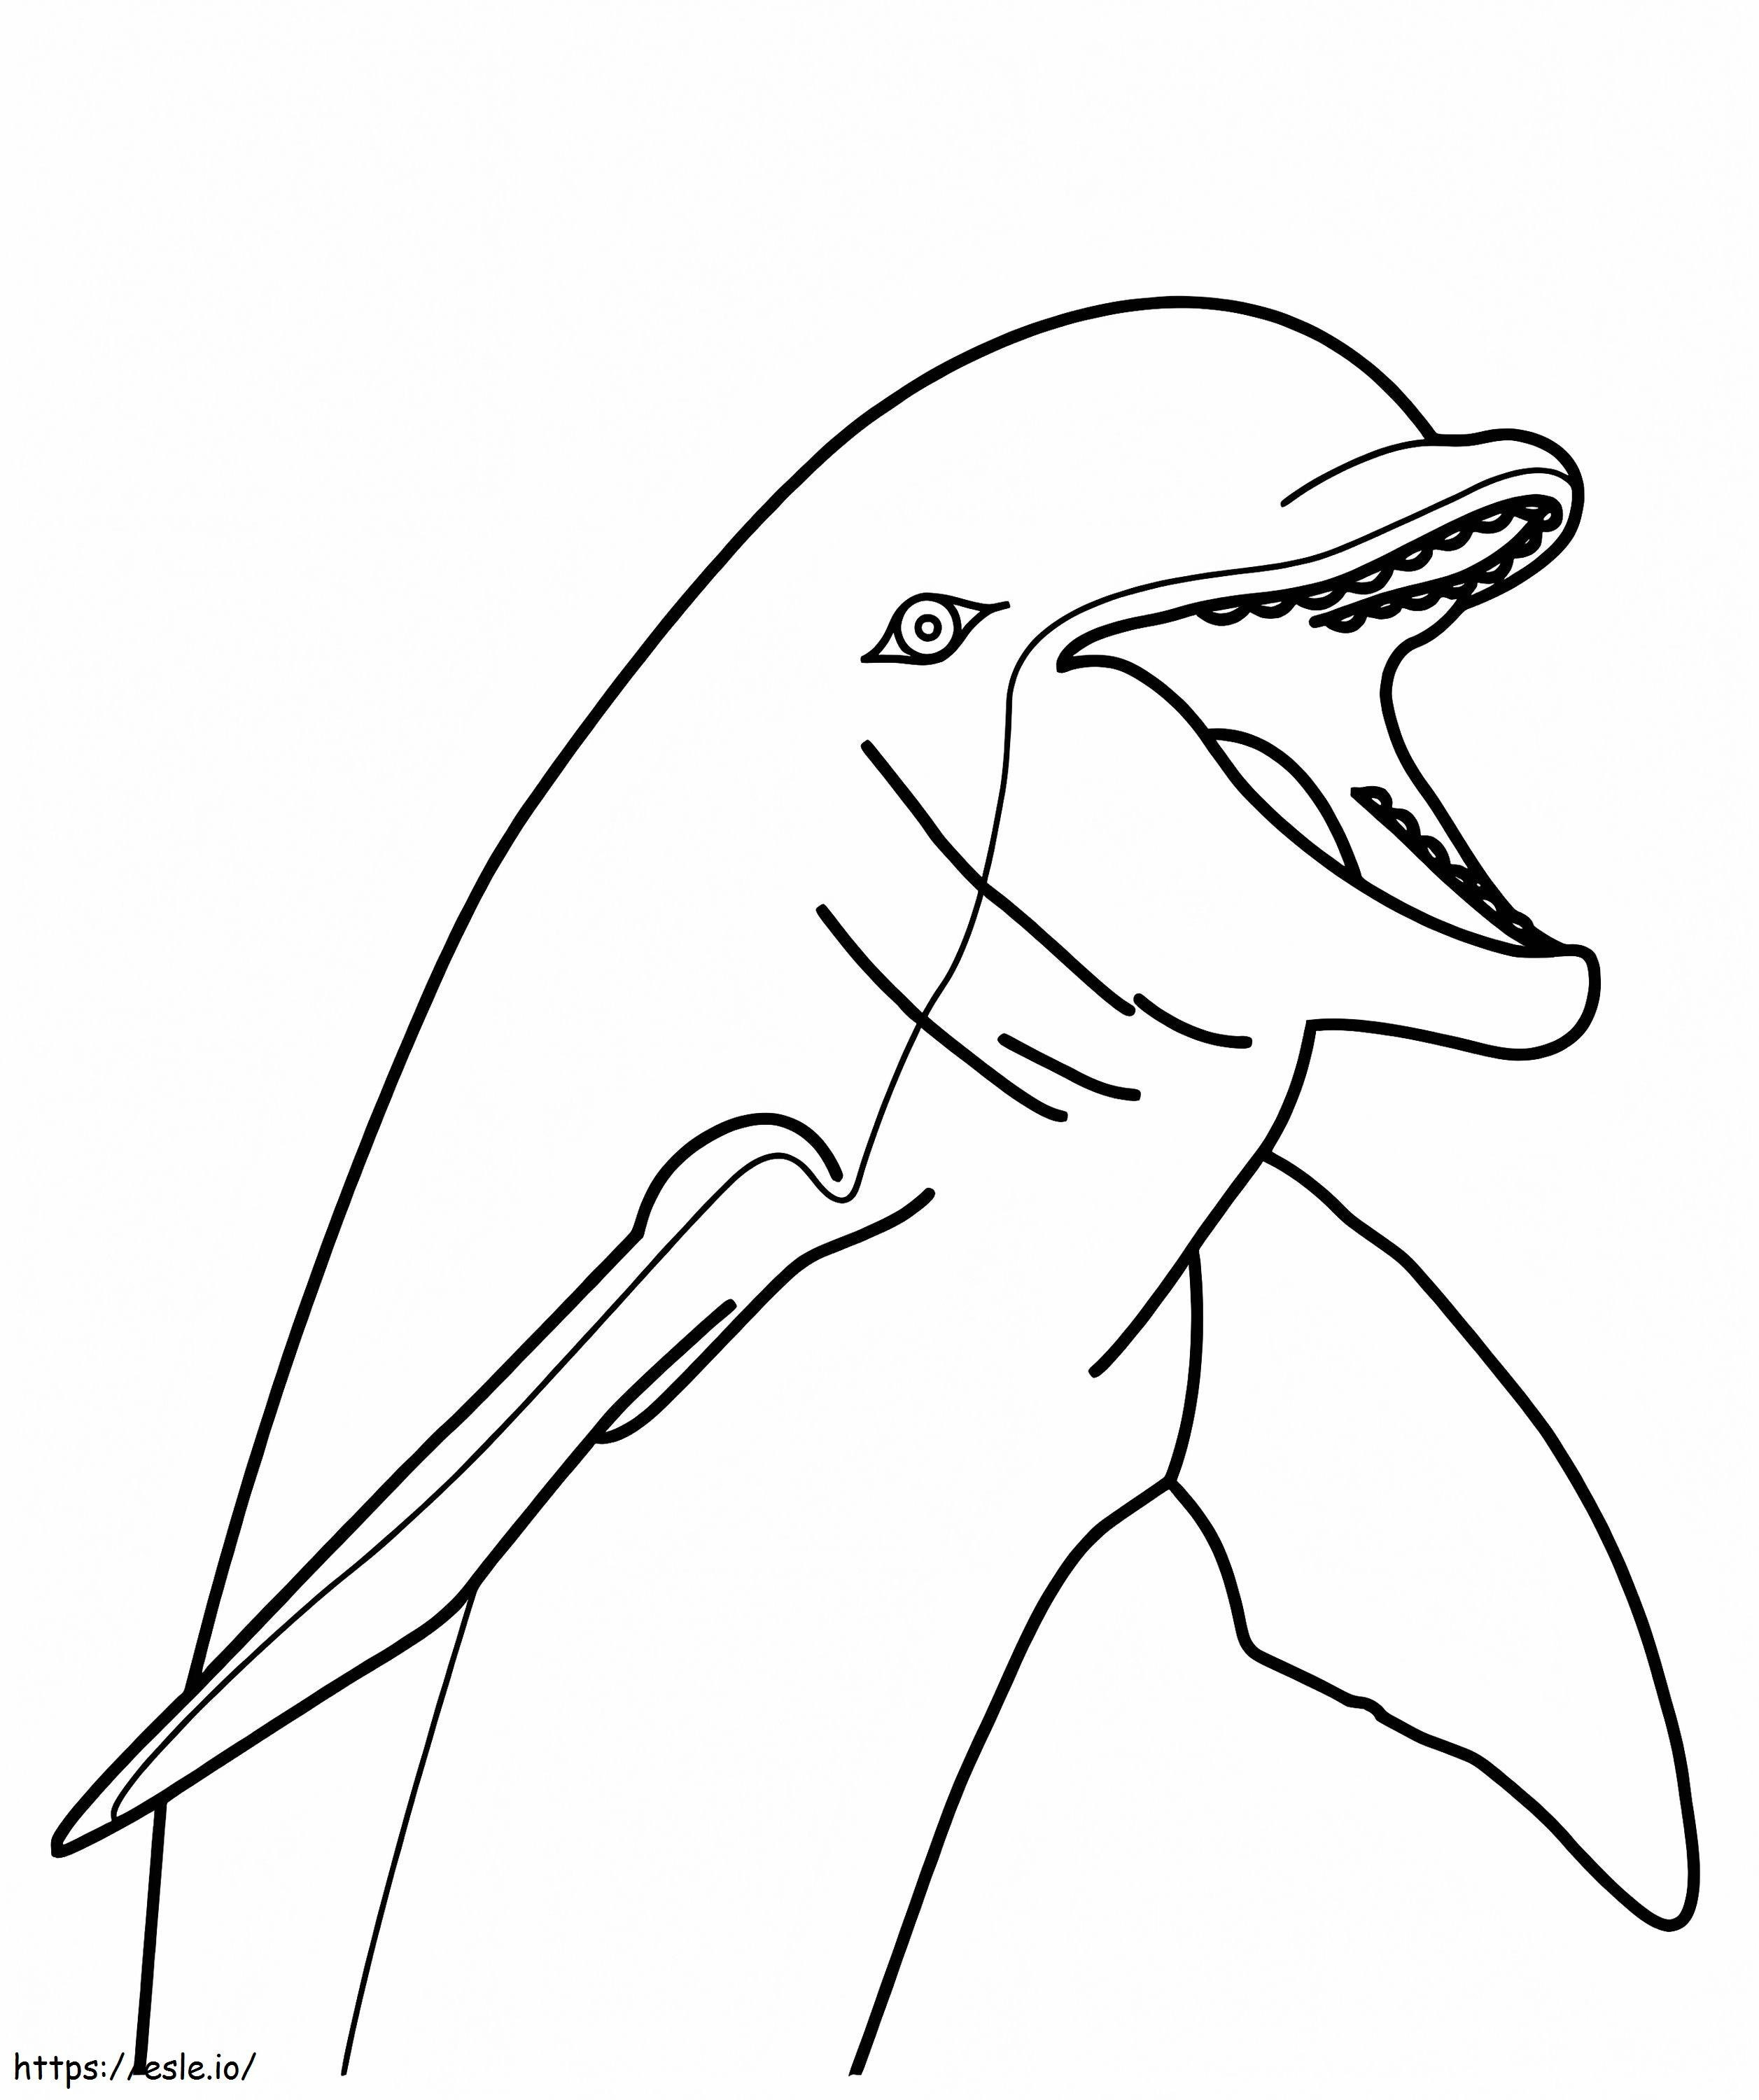 Dolphin Face coloring page